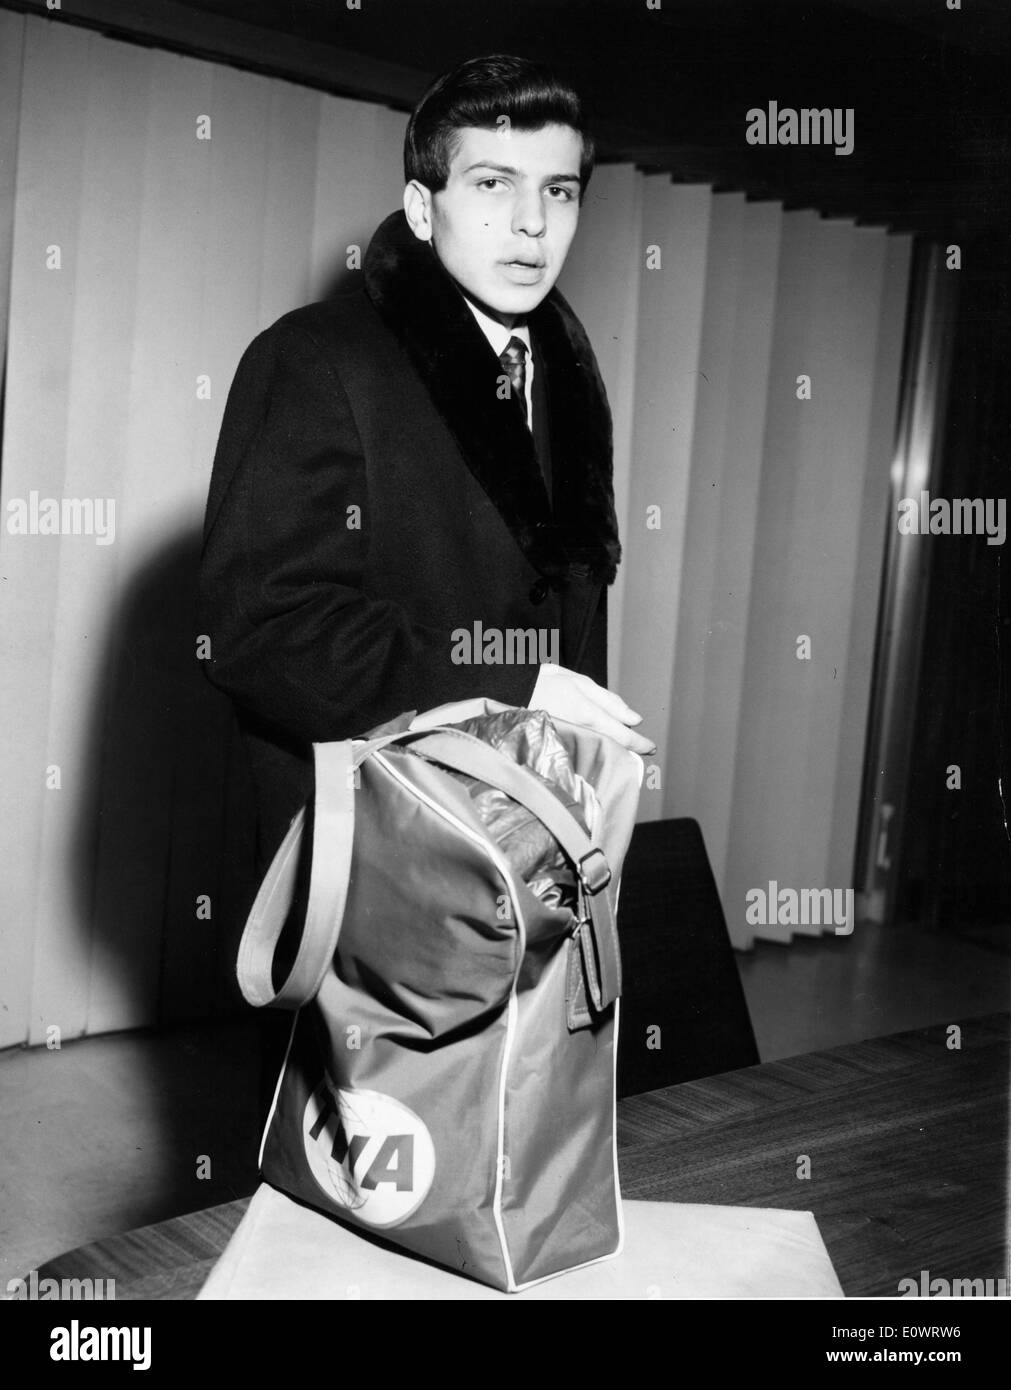 Singer Frank Sinatra Jr. at the airport while on tour Stock Photo